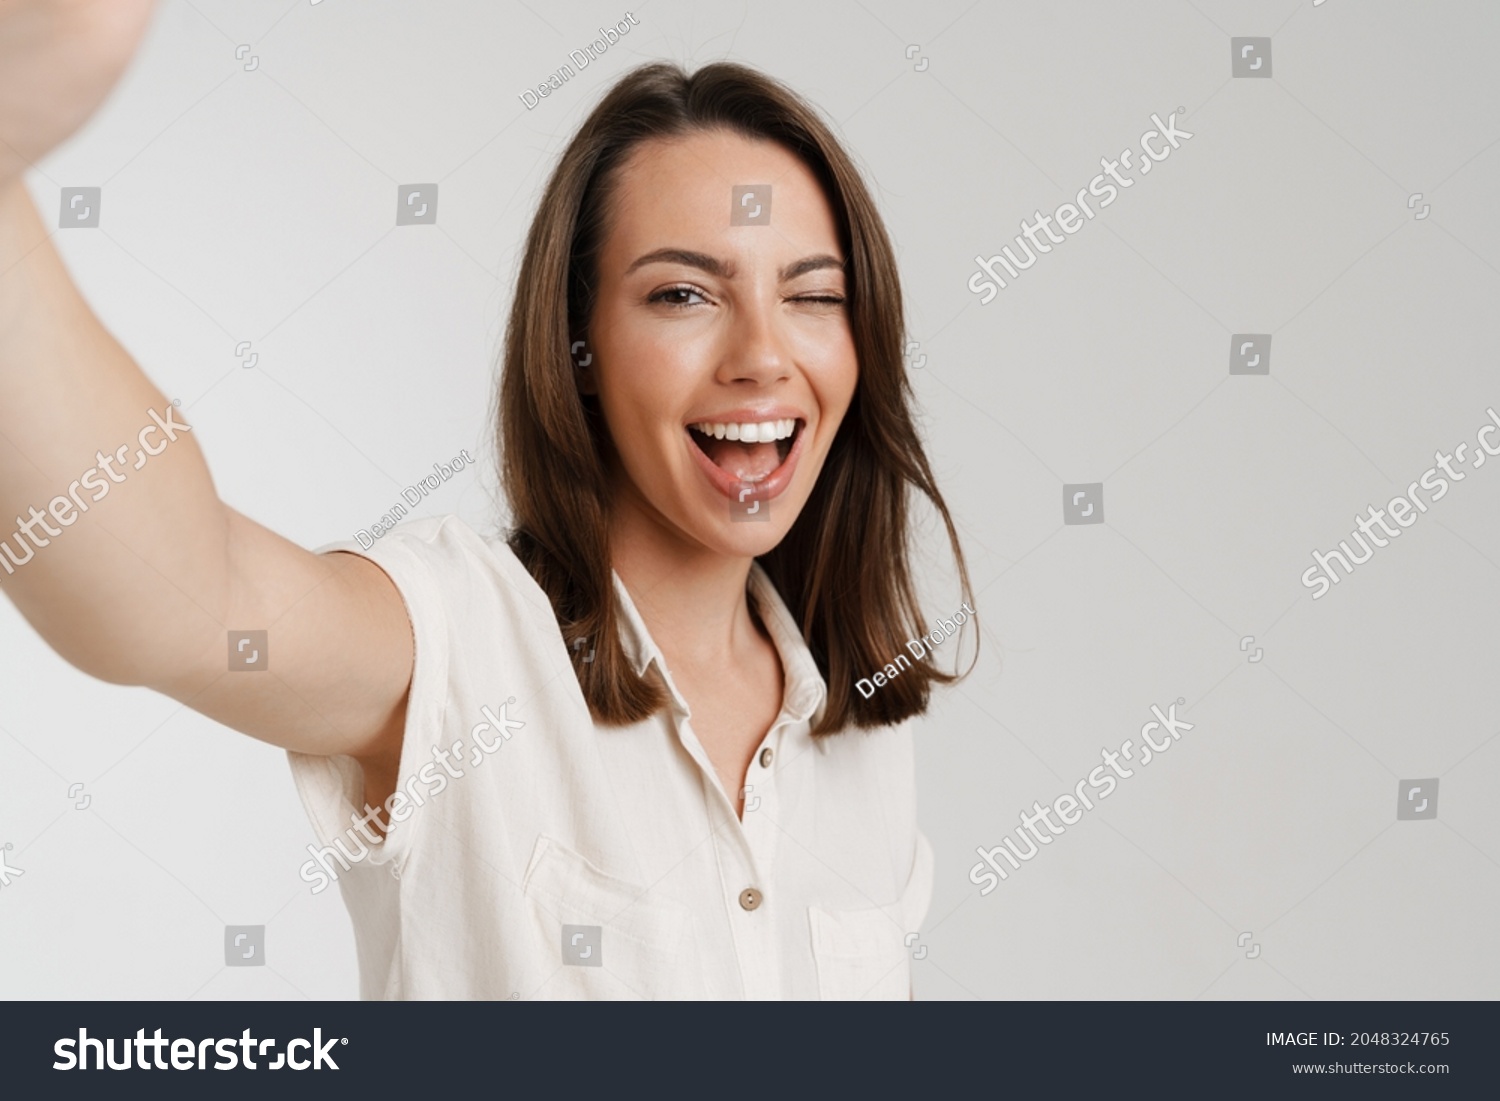 Young european woman winking while taking selfie photo isolated over white background #2048324765